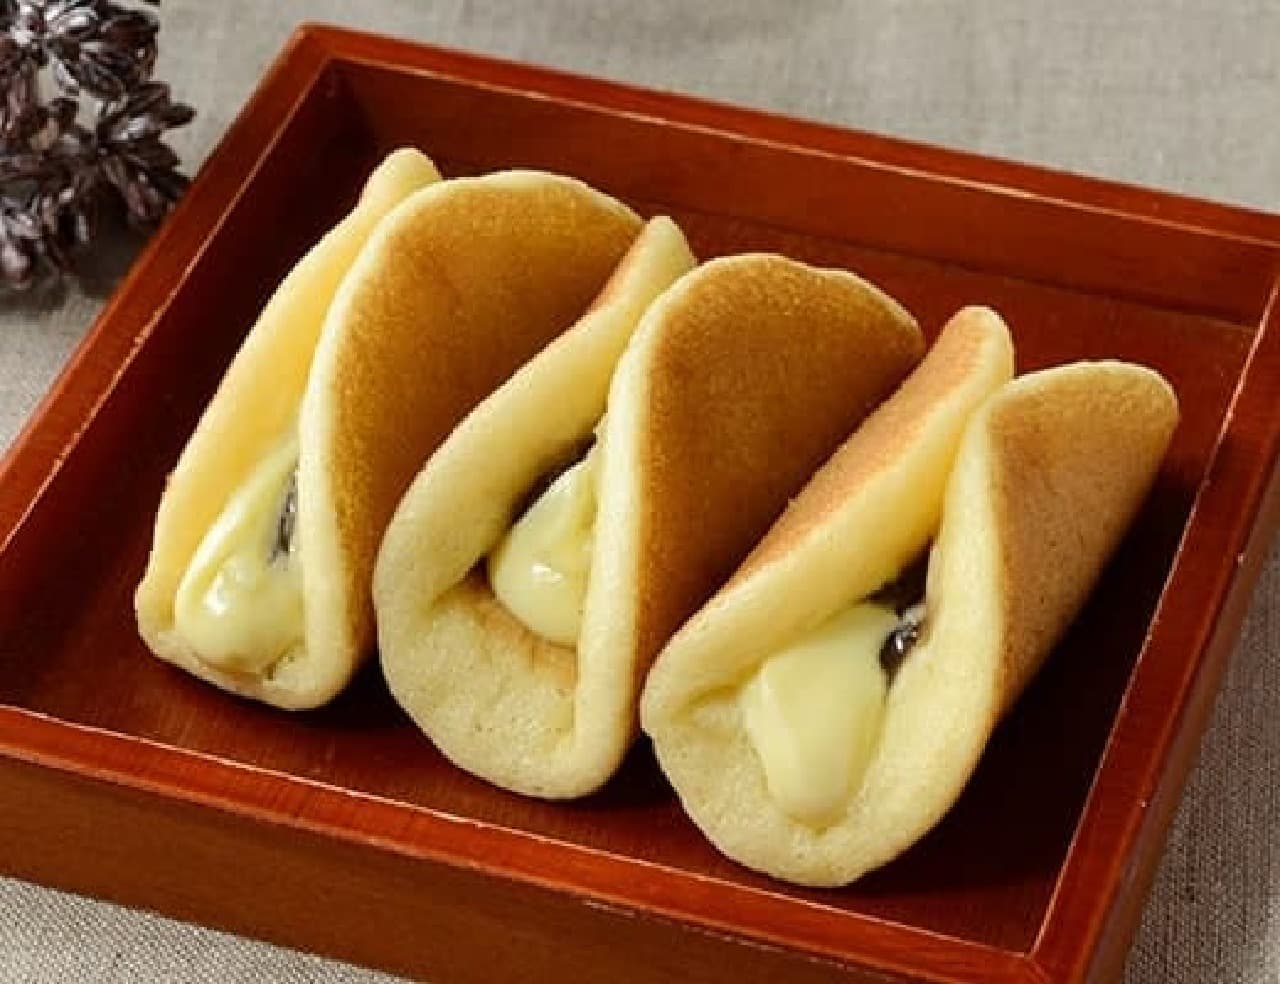 LAWSON "Wrapped Pancakes - 3 pieces with sweet bean paste & margarine